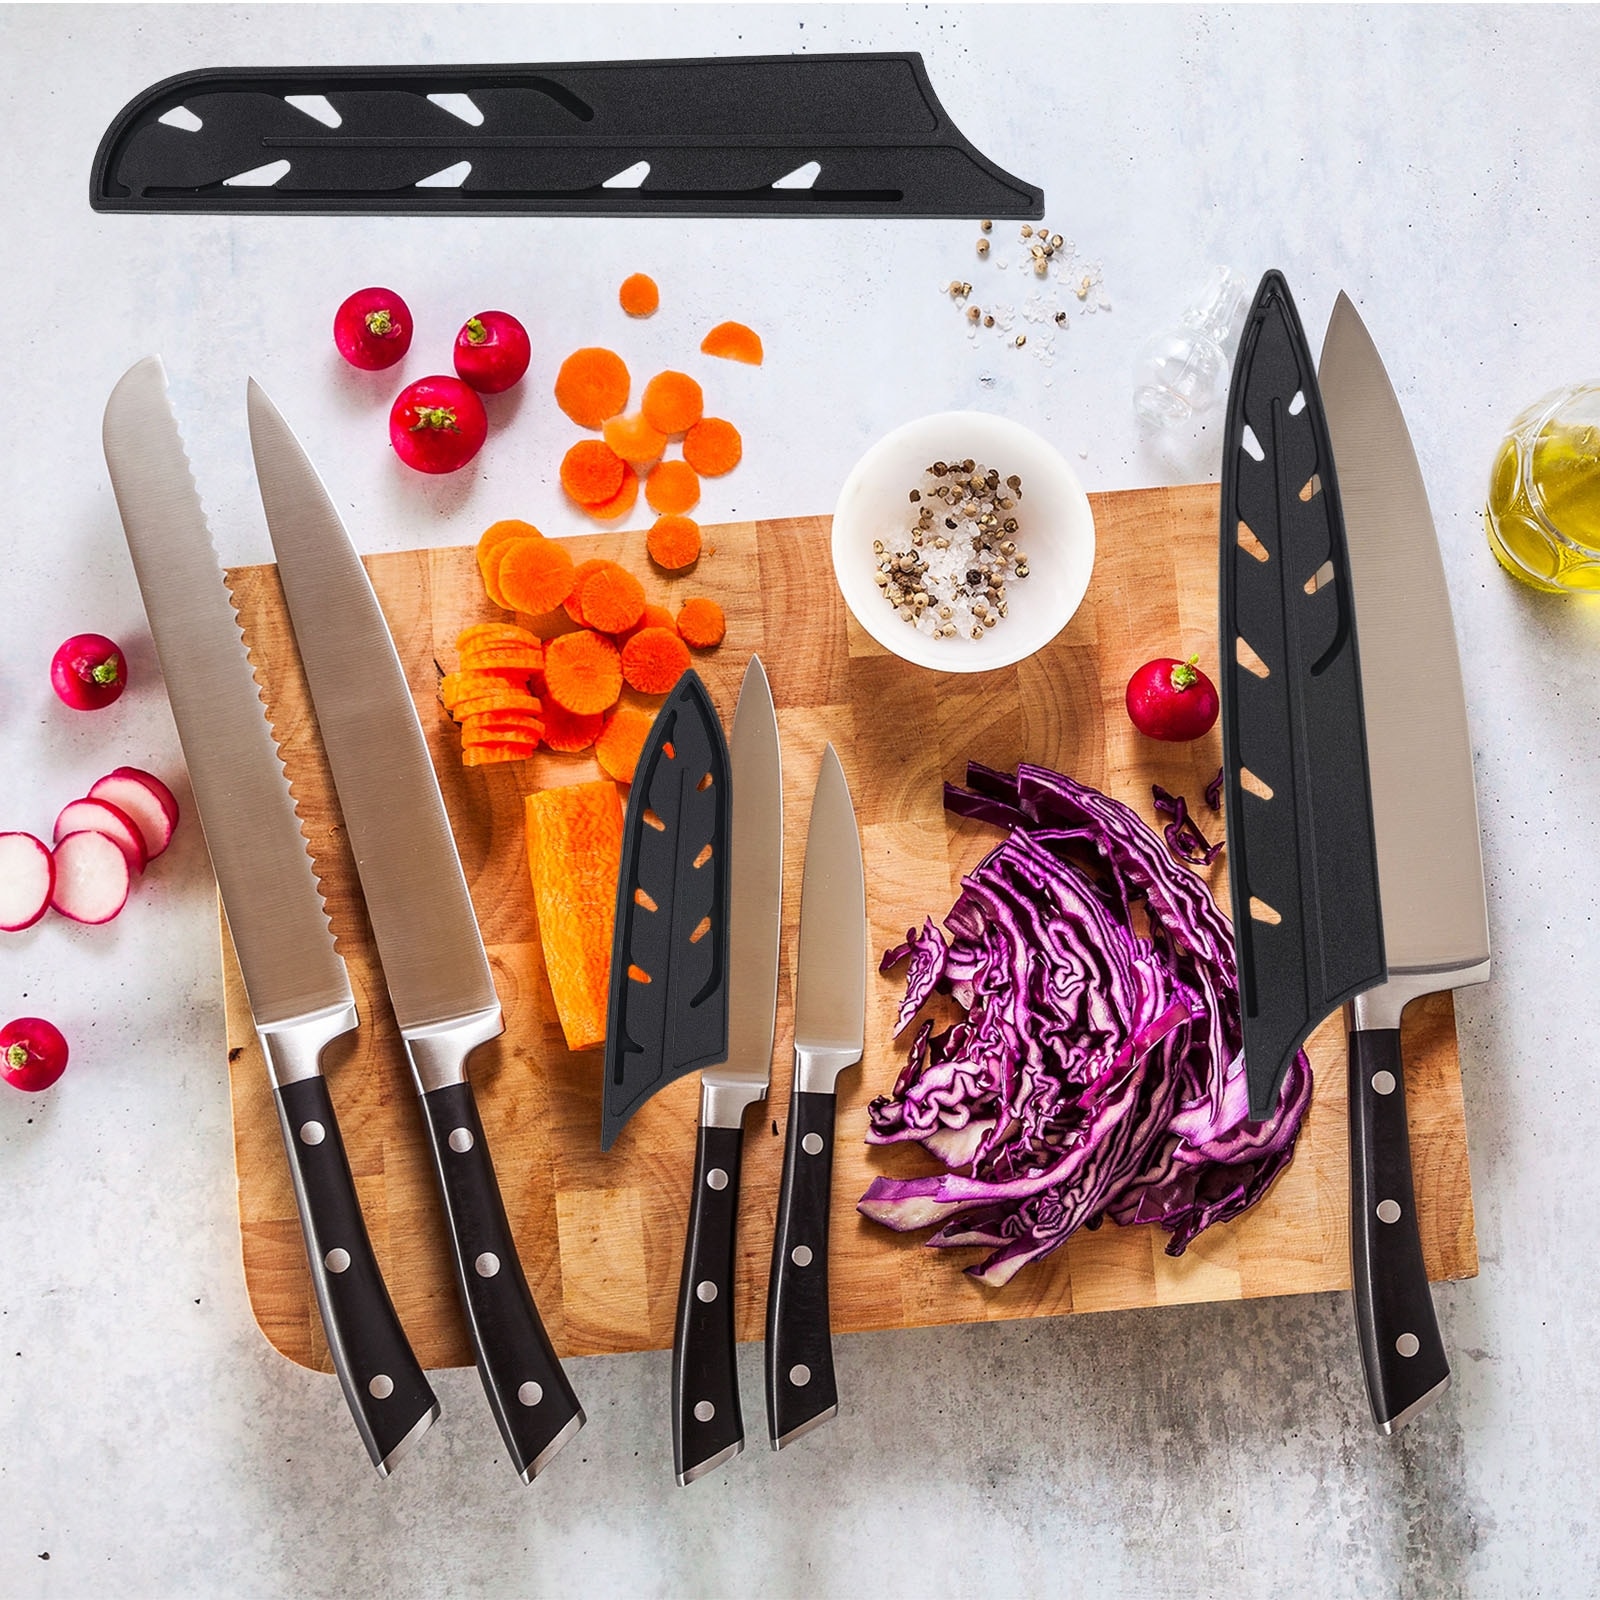 https://ak1.ostkcdn.com/images/products/is/images/direct/62bd42dfaeccf7574e3914c96c05c09b78793ef8/Plastic-Kitchen-Knife-Sheath-Cover-Sleeves-for-8%22-Chef-Knife%2C-Black.jpg